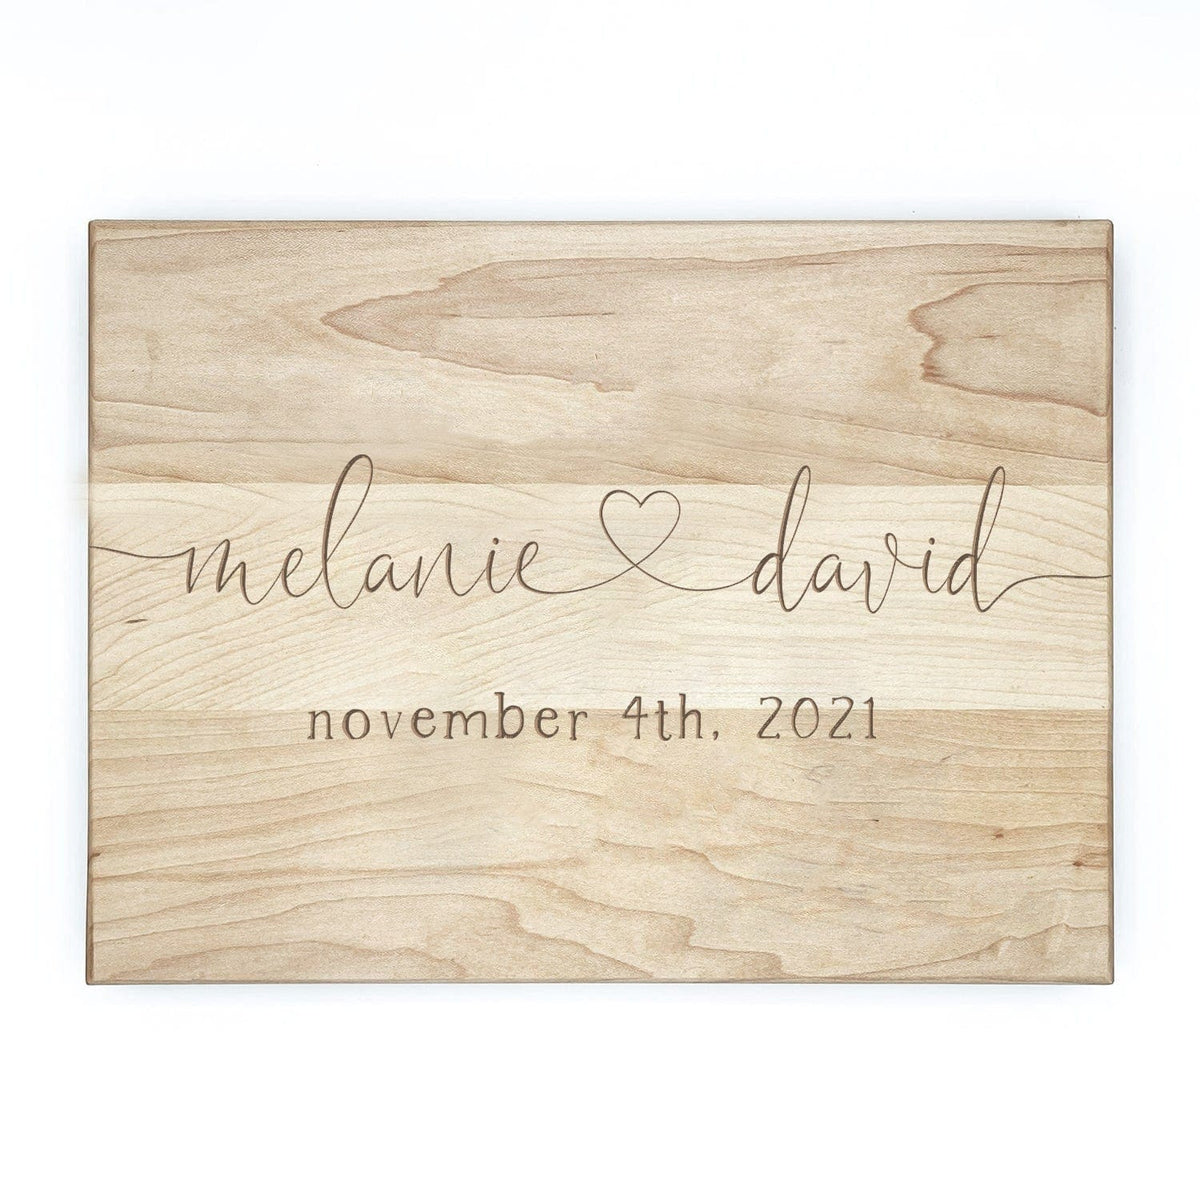 Personalized cutting board gift for weddings